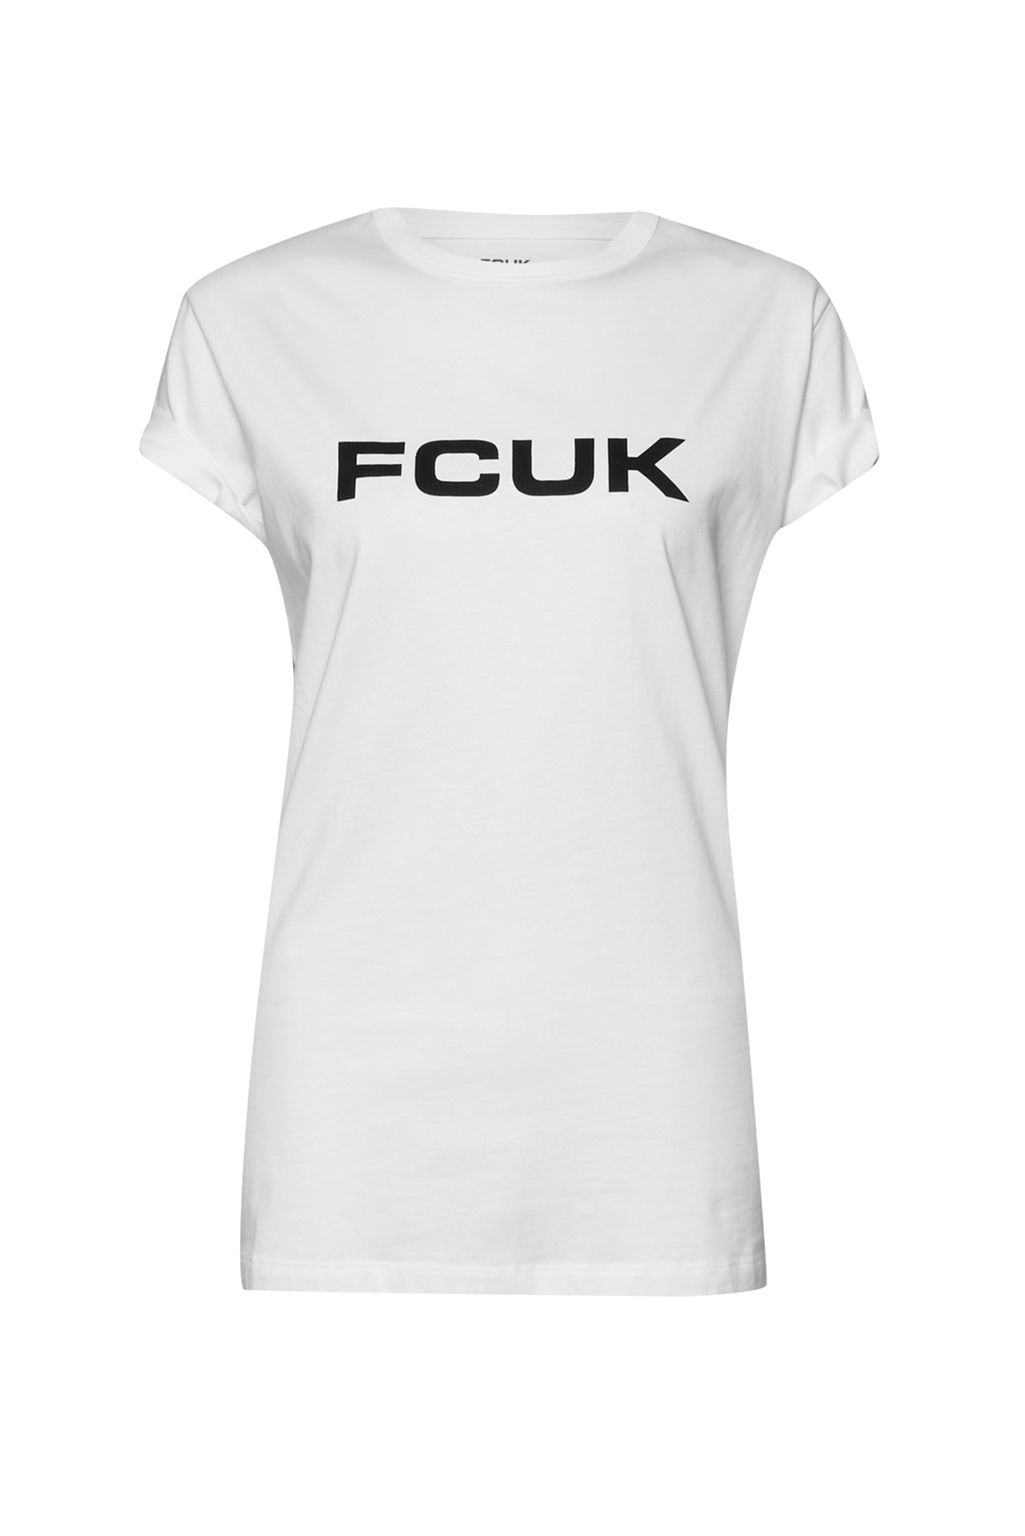 French connection Fcuk Bold Slogan T-shirt in White | Lyst